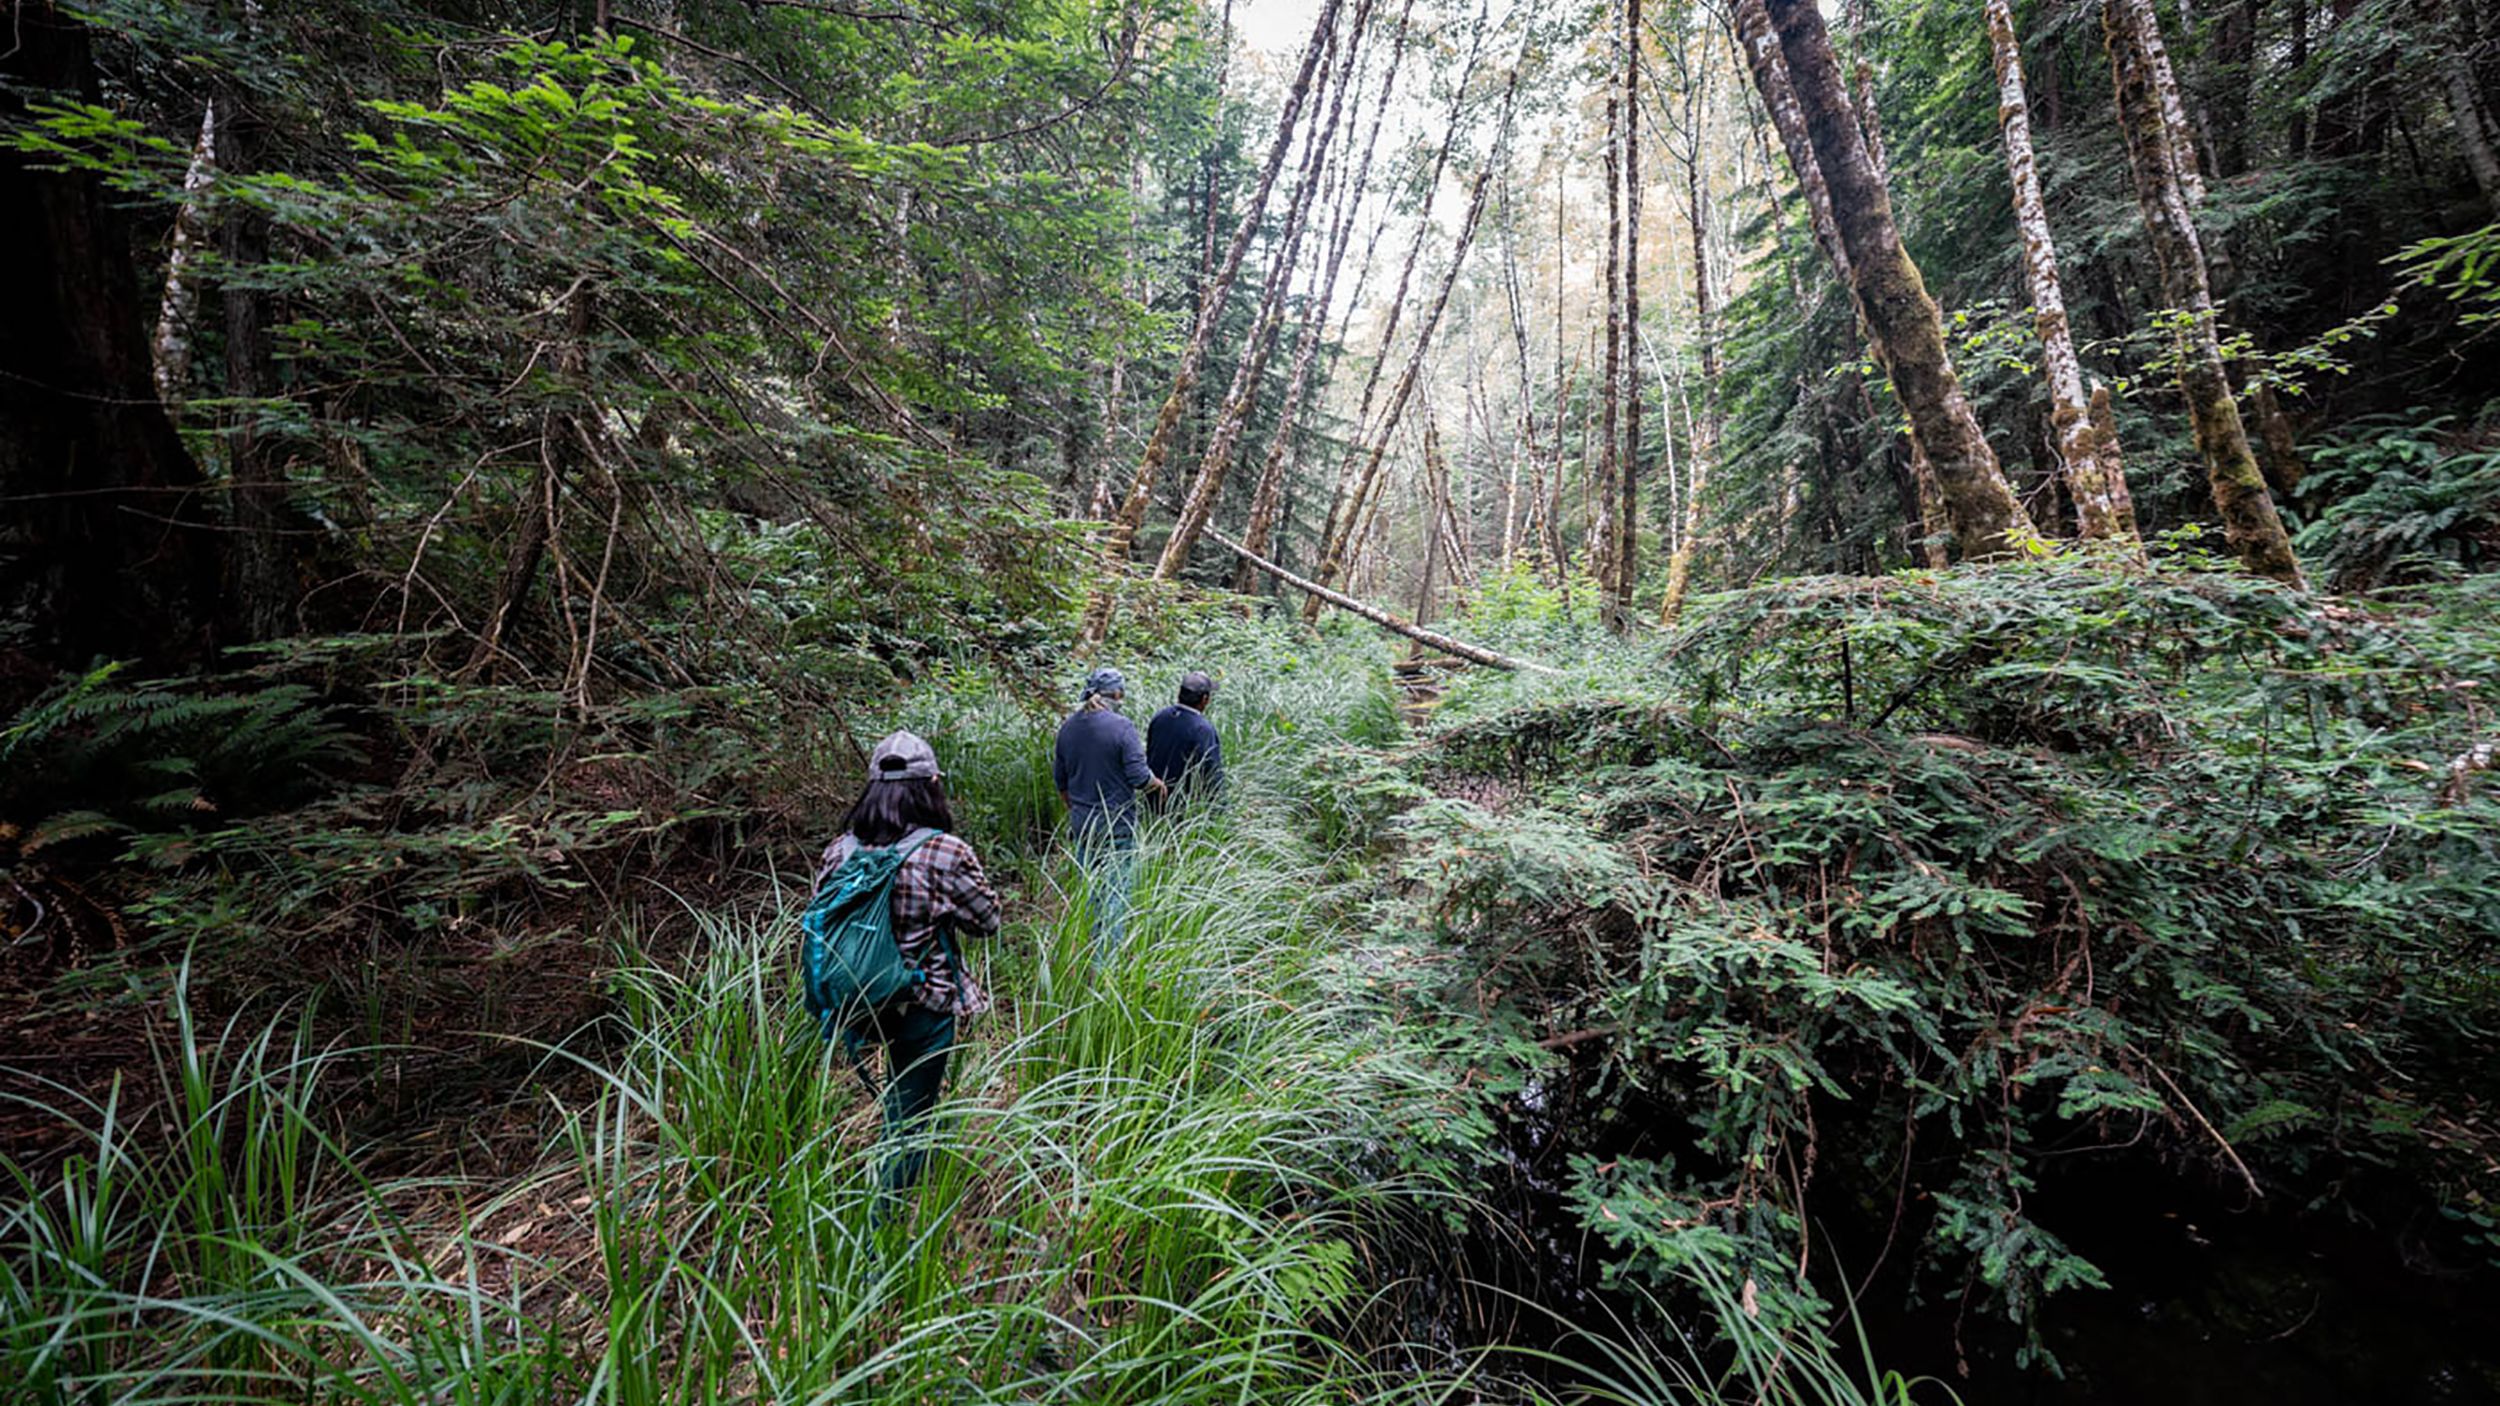 InterTribal Sinkyone Wilderness Council representatives and Save the Redwoods League staff visiting Tc'ih-Léh-Dûñ in June 2021.